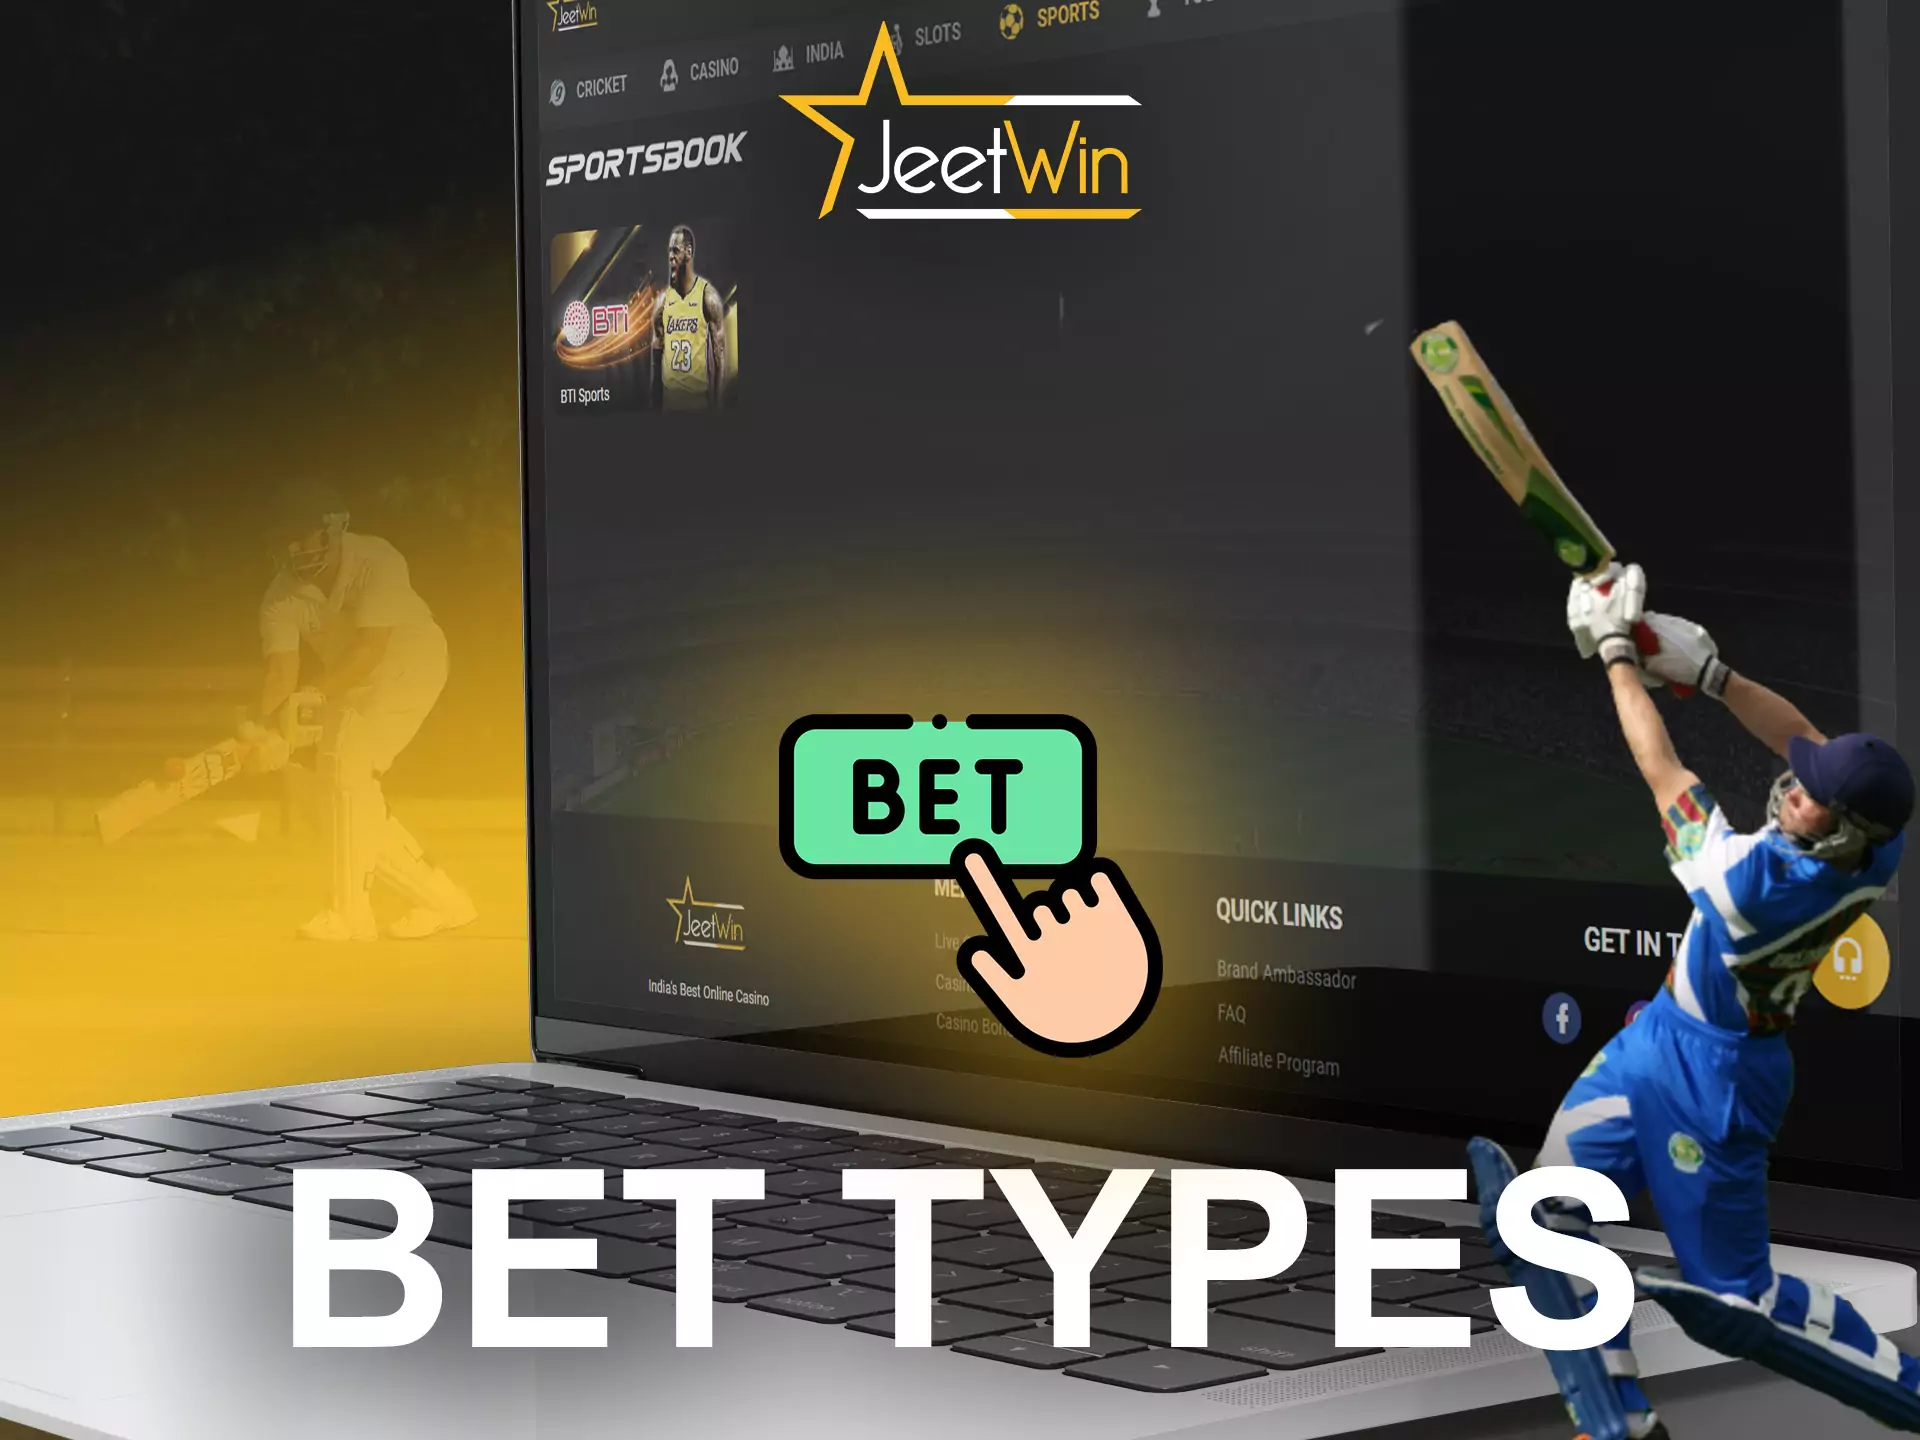 Try all types of bets on JeetWin.